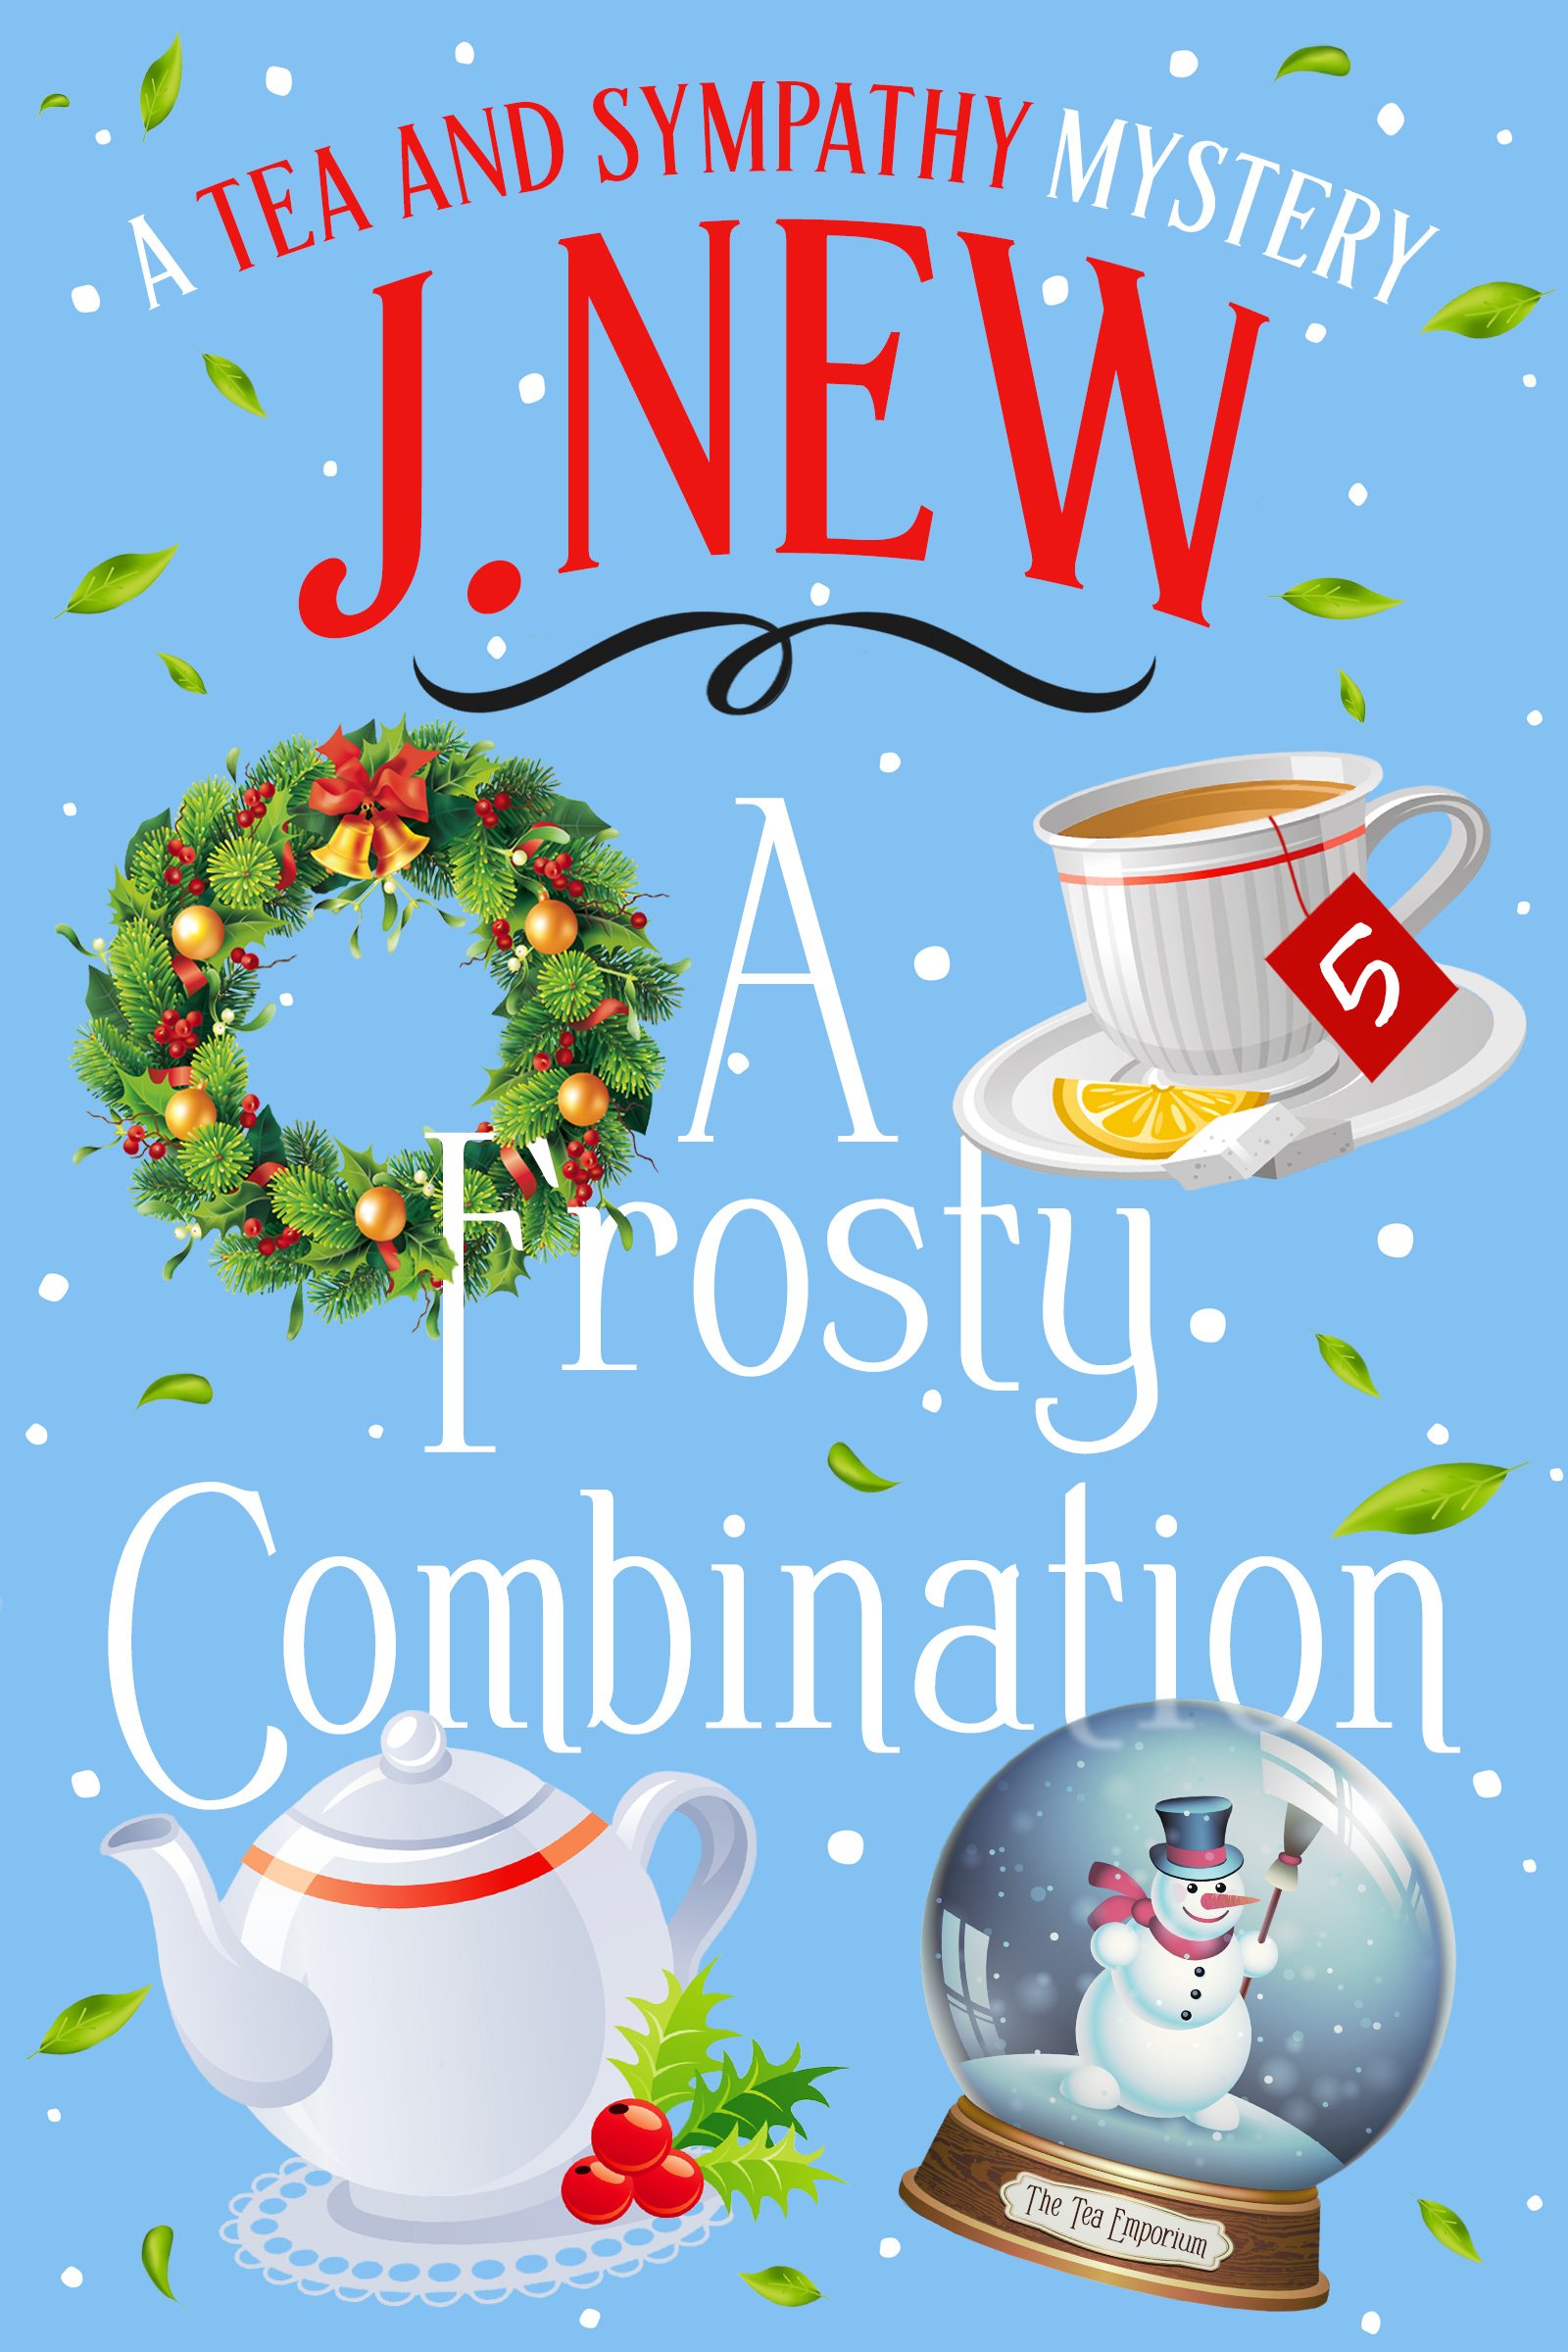 A Frosty Combination book 5 in the popular British cozy culinary mystery series by British author J. New